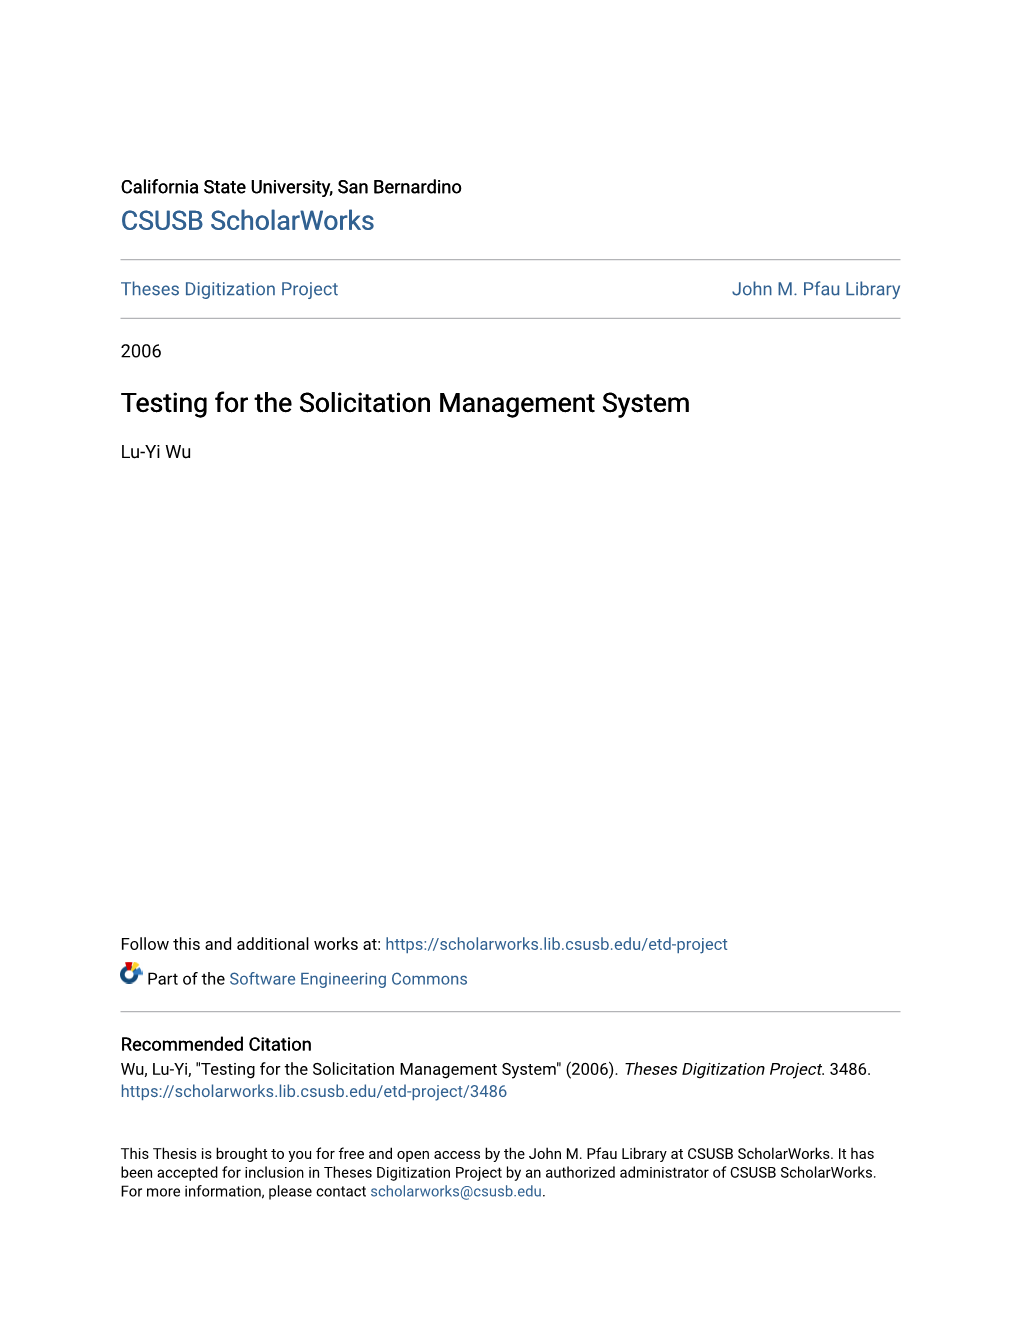 Testing for the Solicitation Management System